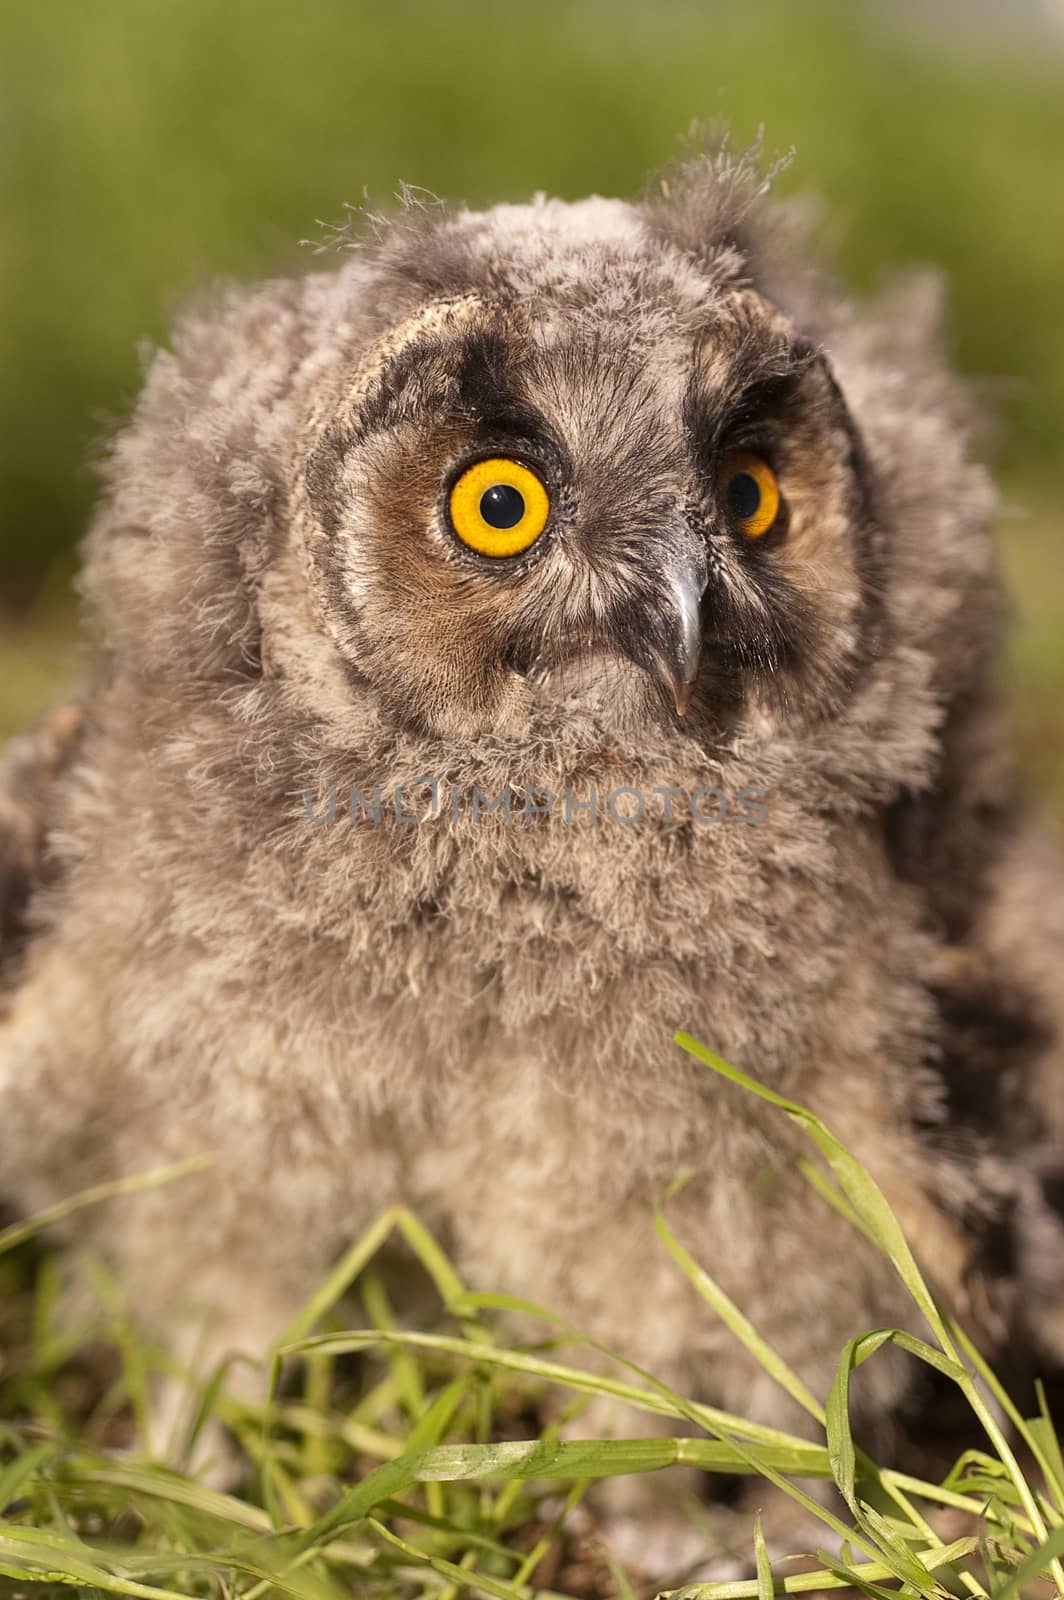 Long-eared owl, young (Asio otus), portrait  by jalonsohu@gmail.com